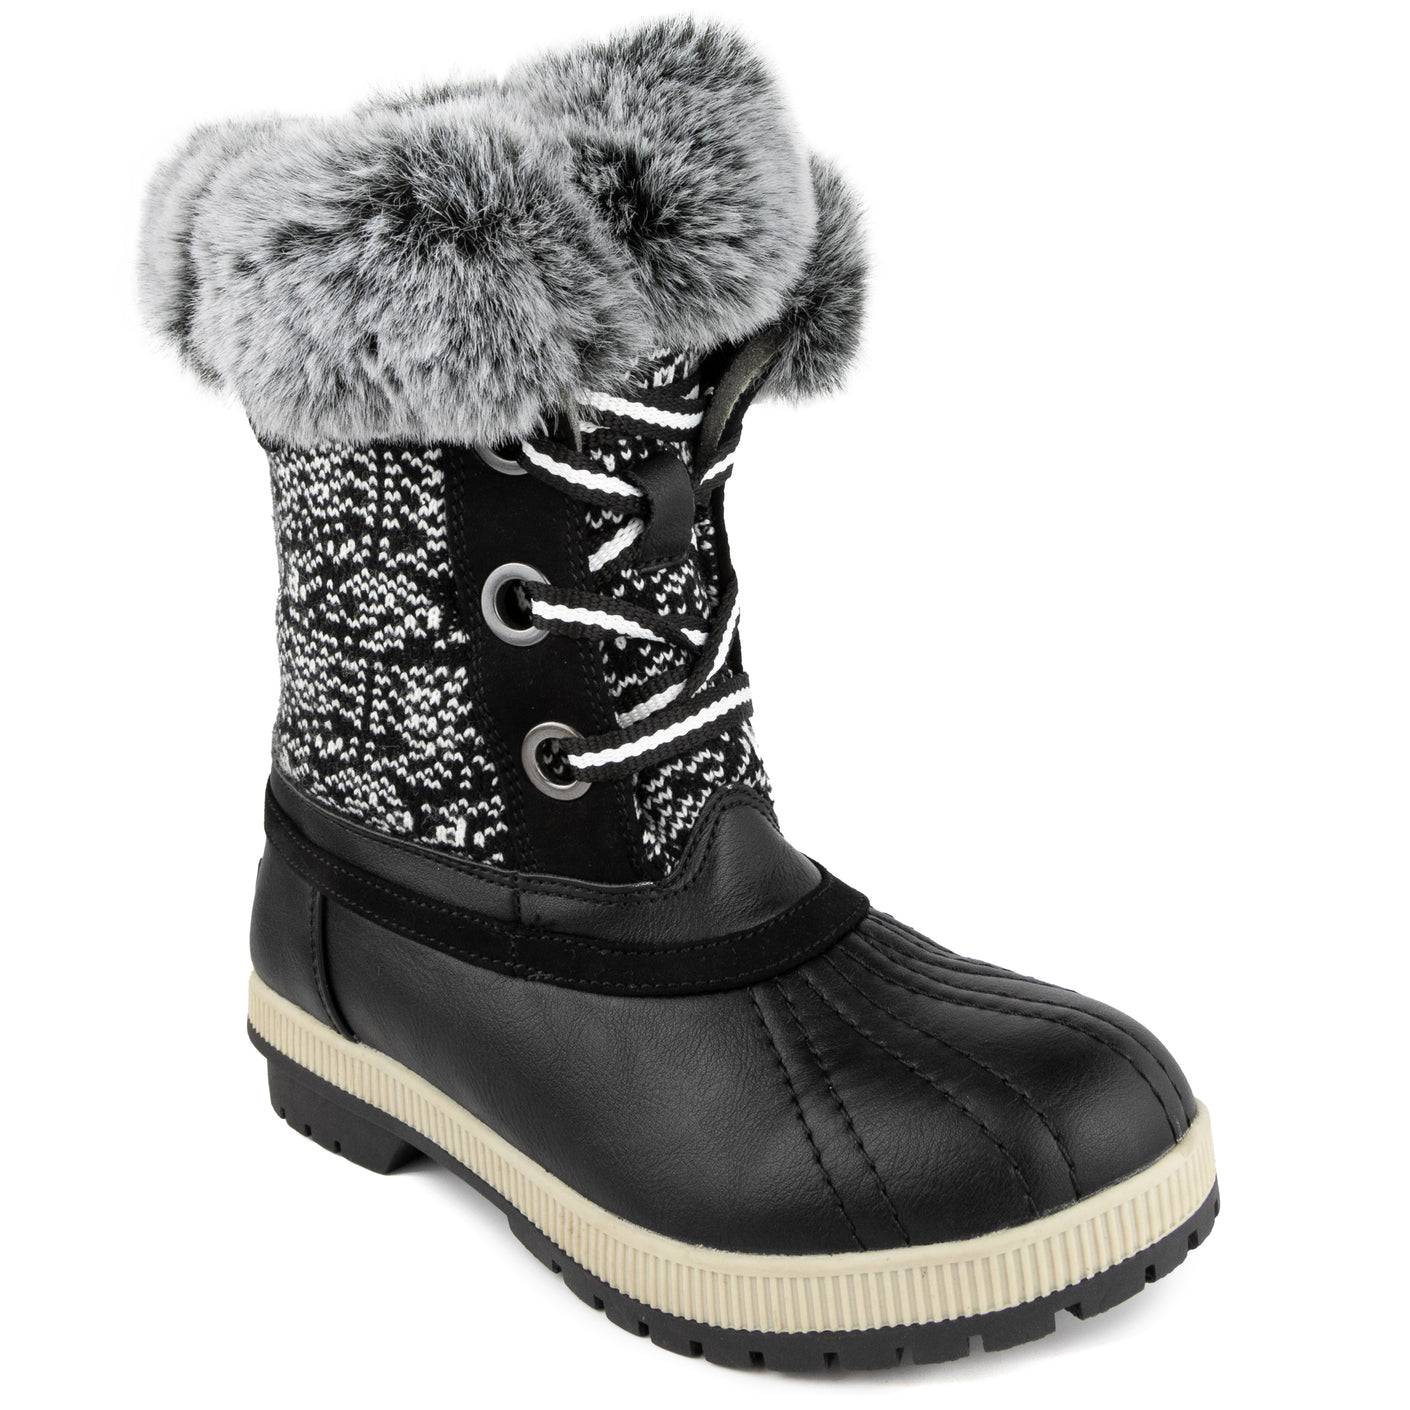 Black and White Stripe Milly Women's Snow Boots